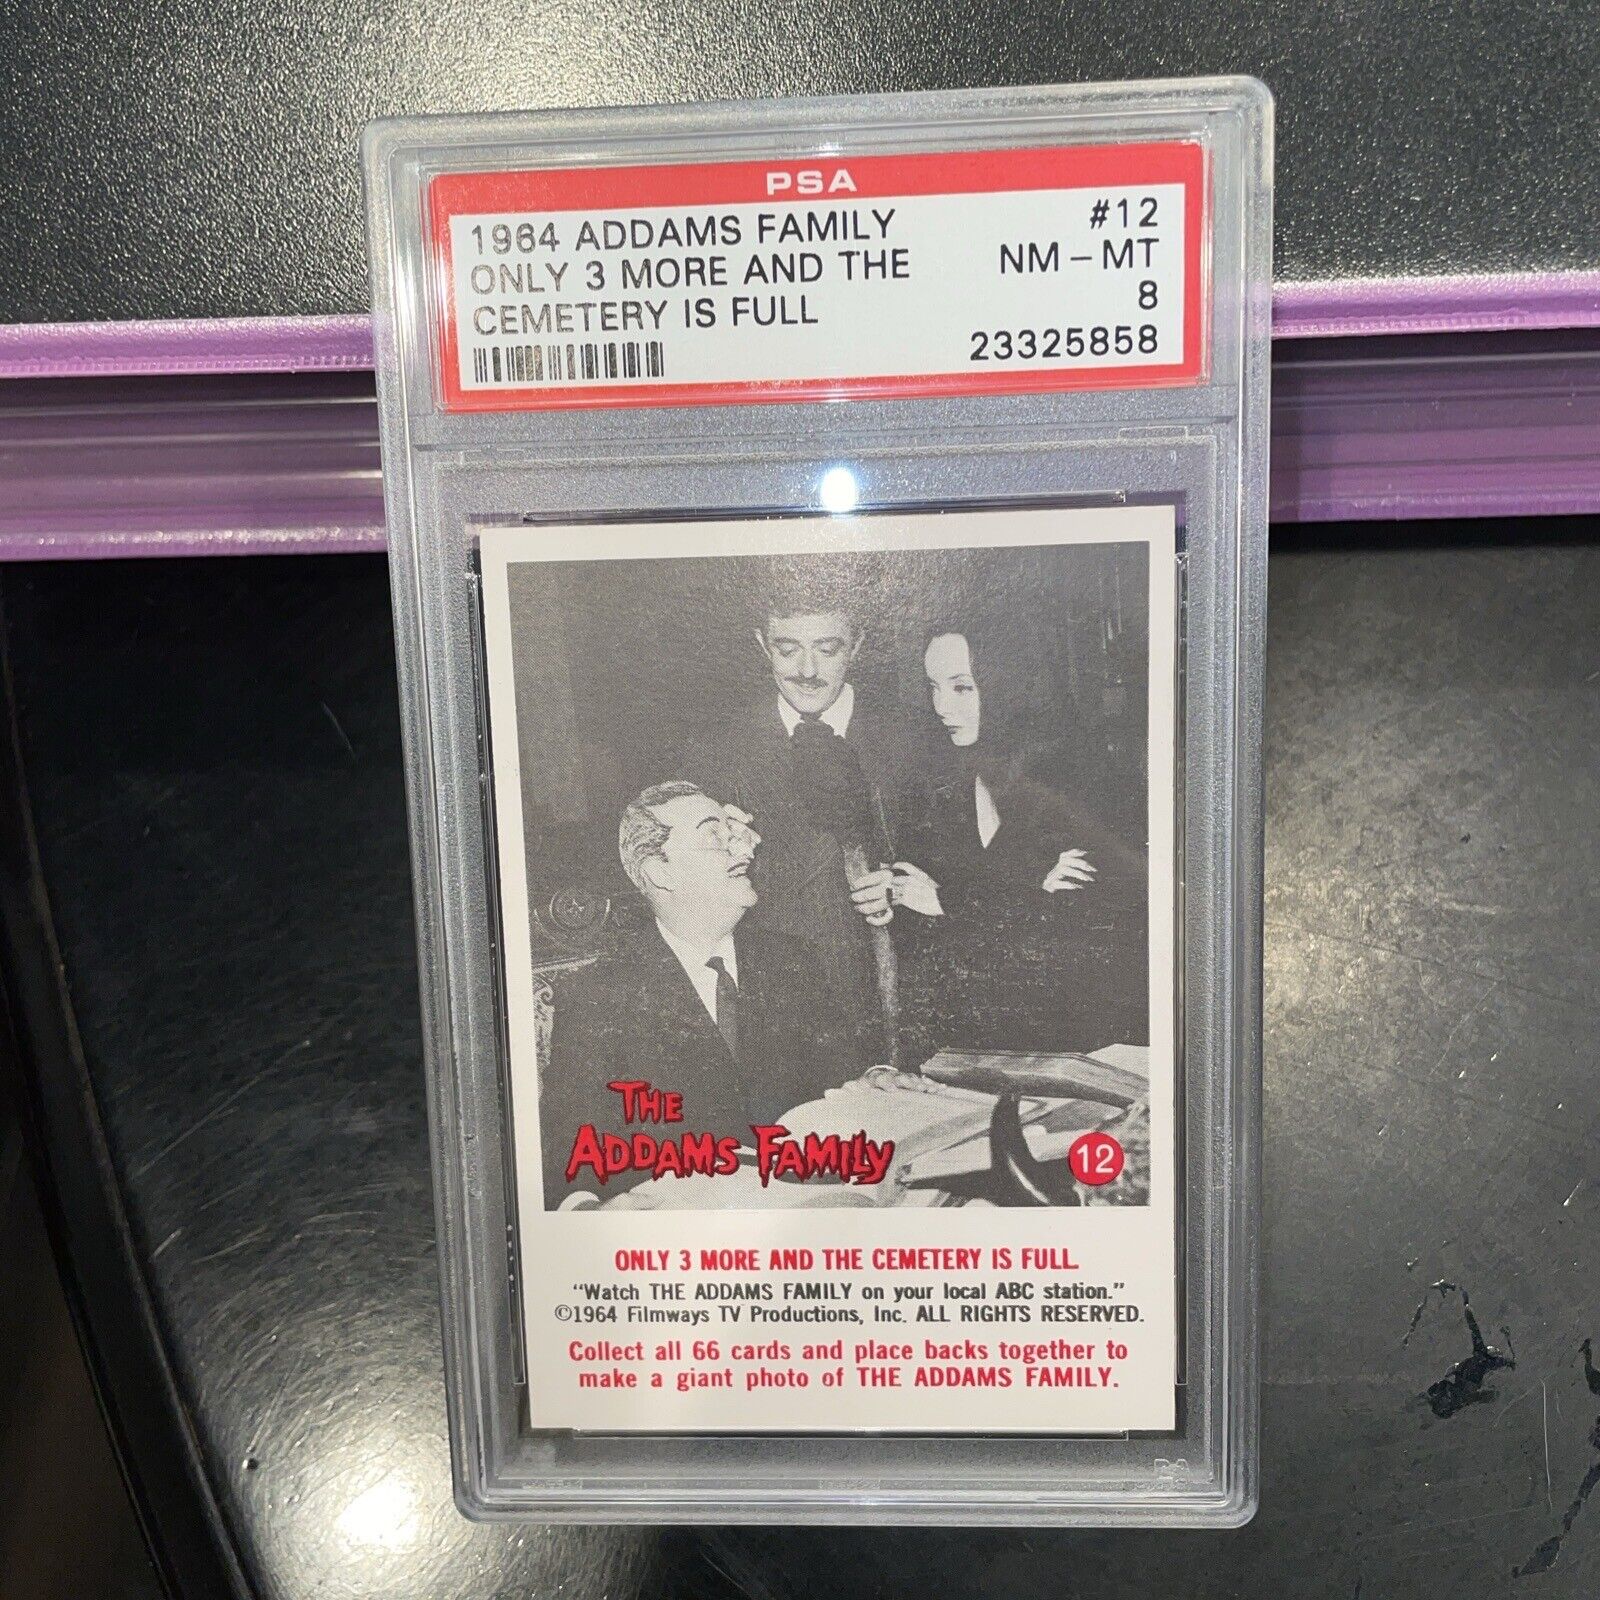 1964 Addams Family # 12 “Cemetery Is full” PSA 8